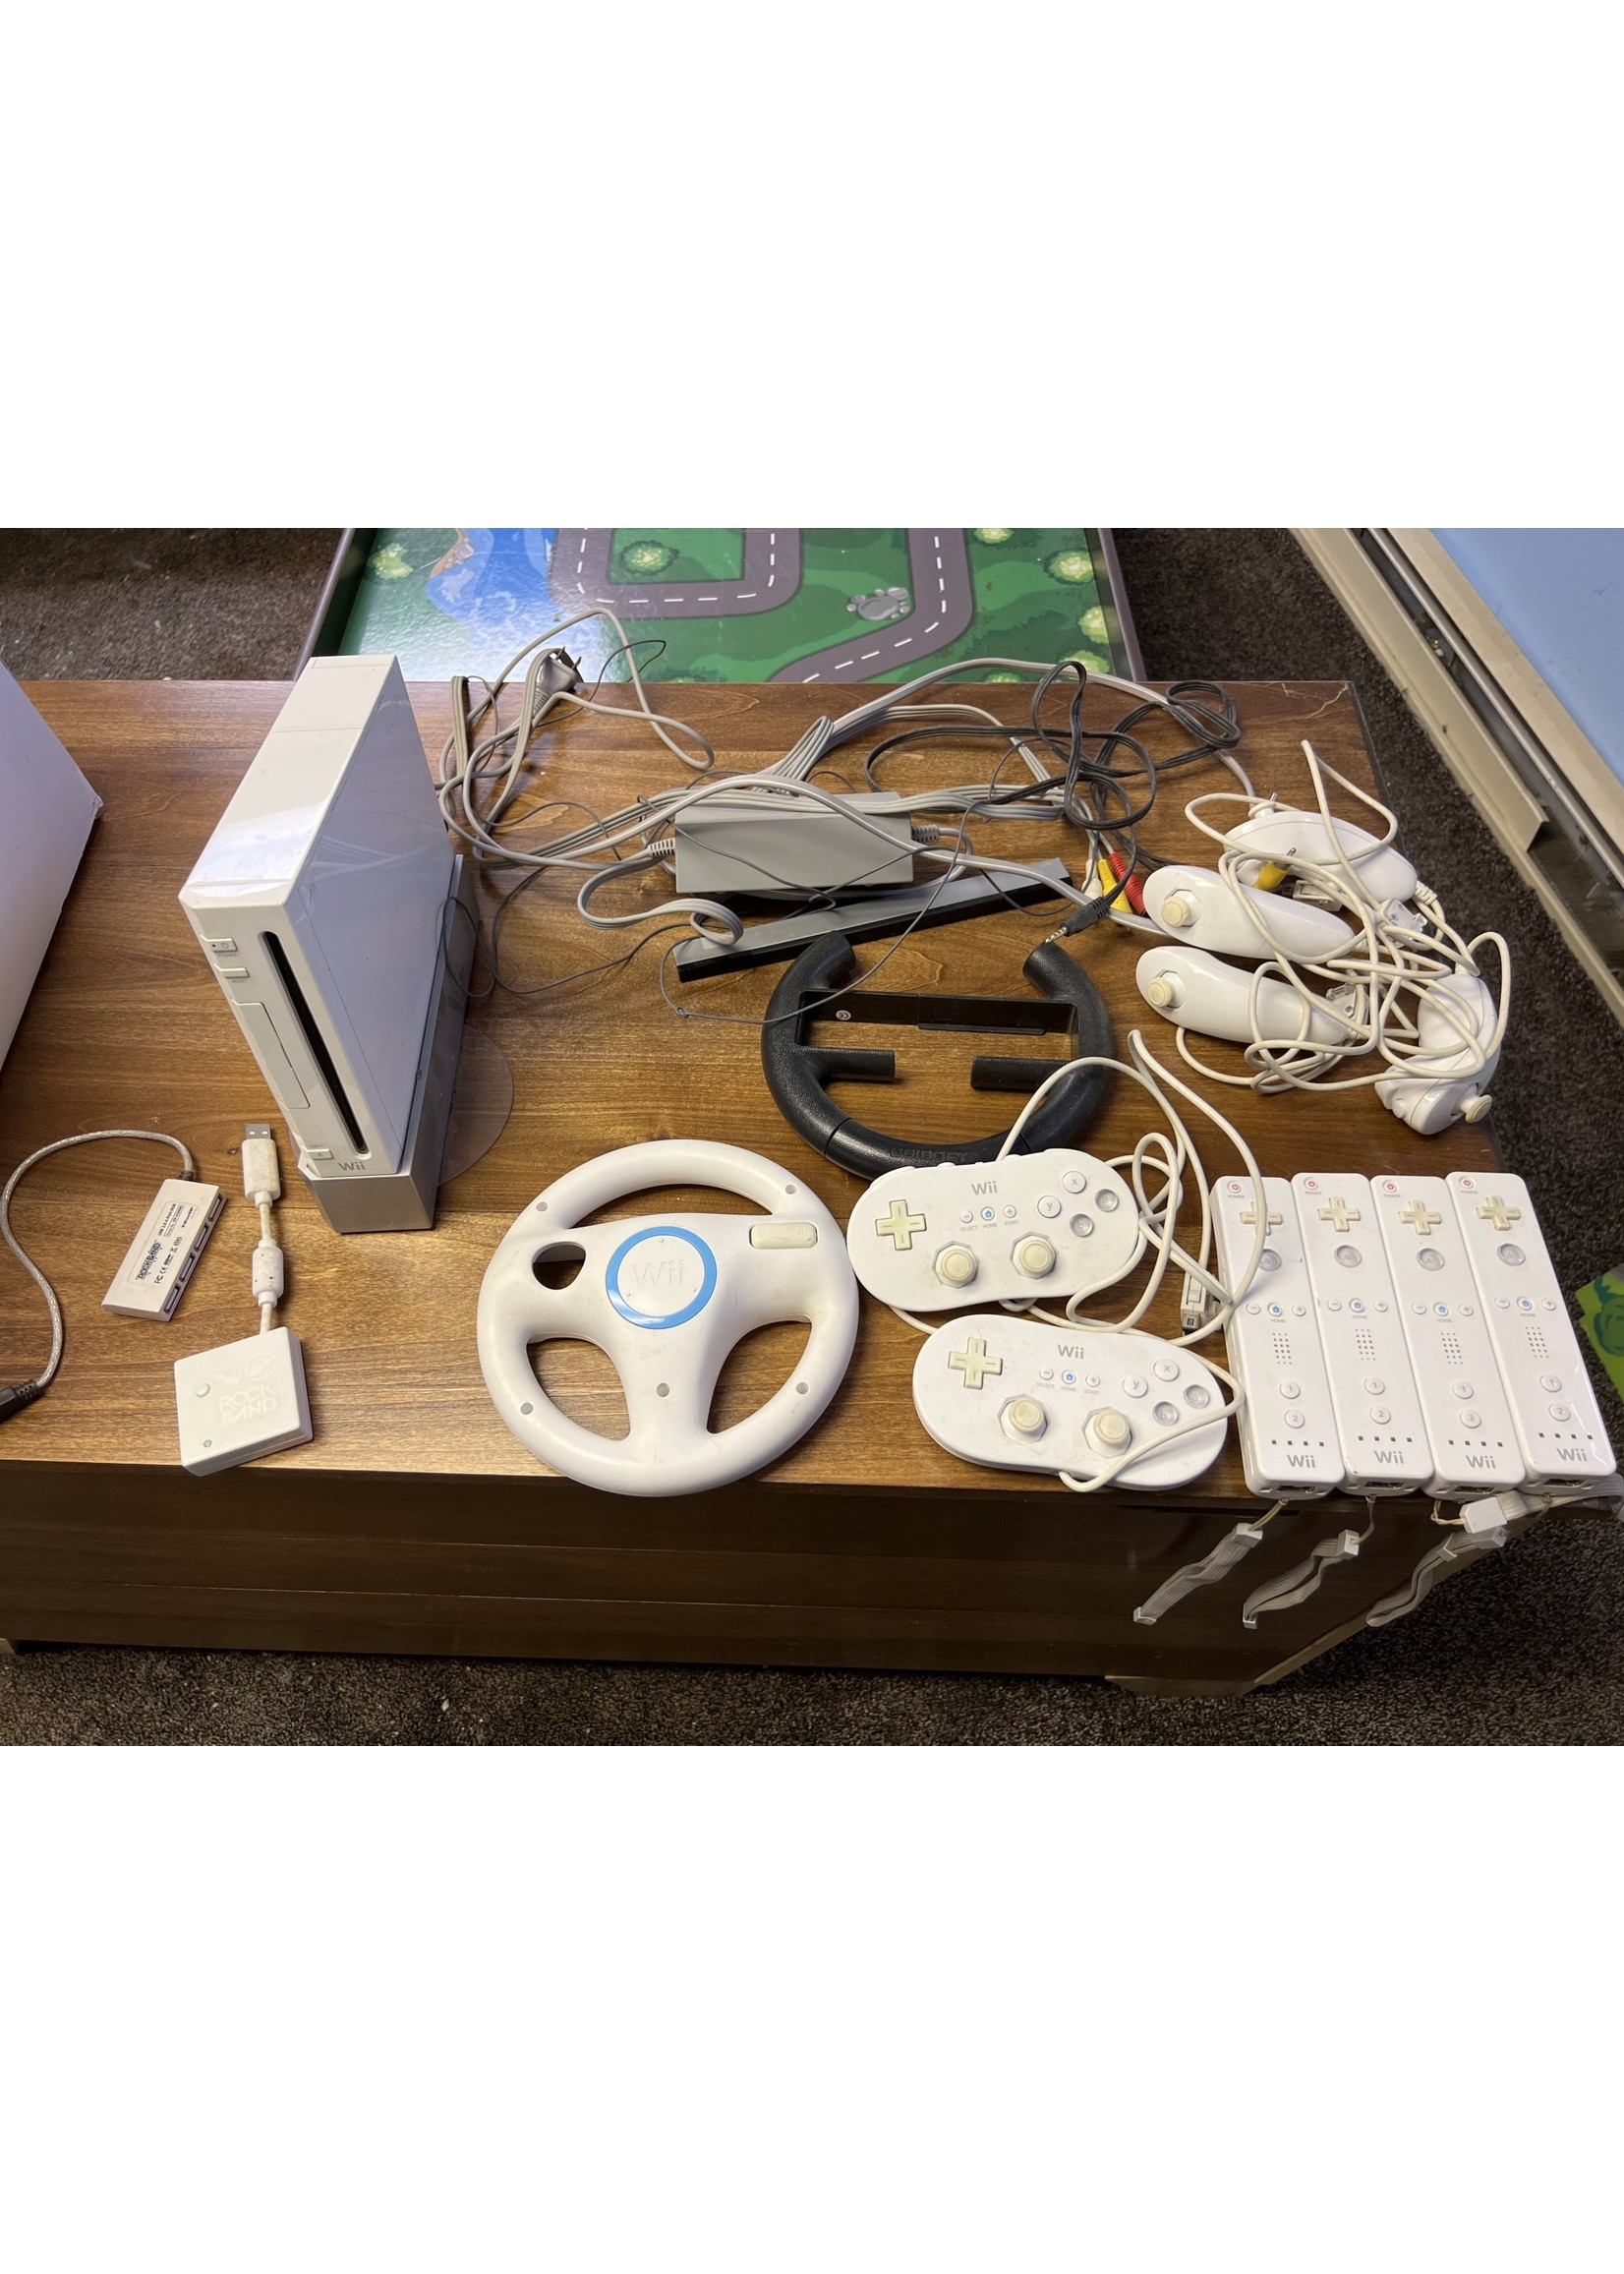 Wii Console with attachments and controllers